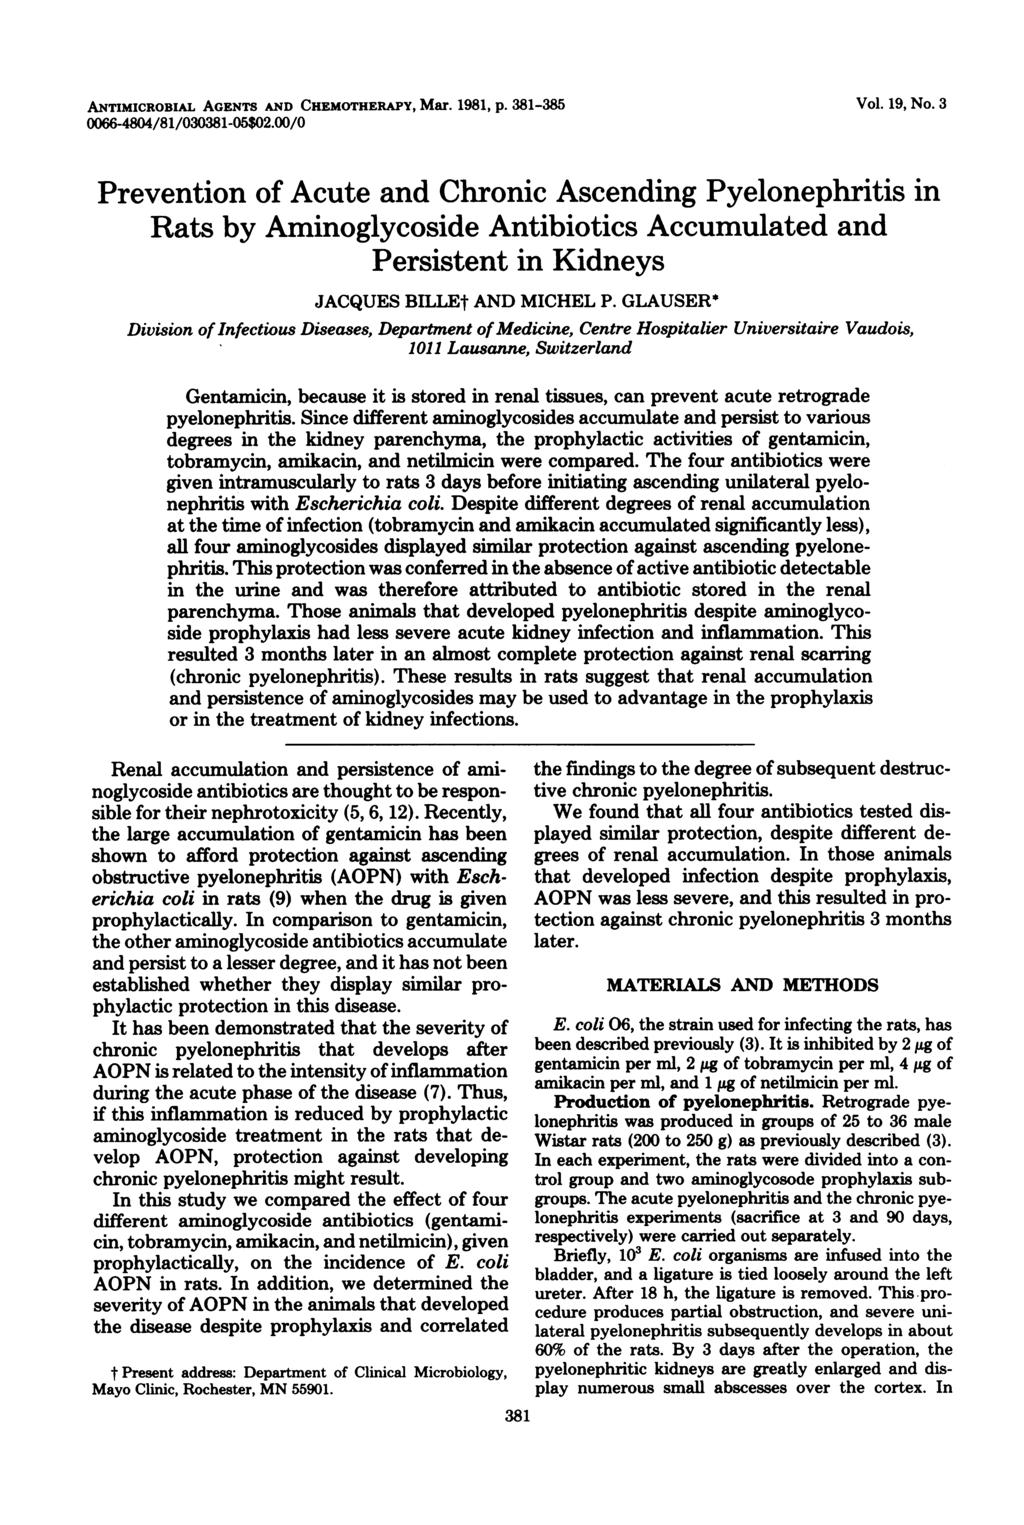 ANTIMICROBIAL AGENTS AND CHEMOTHERAPY, Mar. 1981, p. 381-385 0066-4804/81/030381-05$02.00/0 Vol. 19, No.